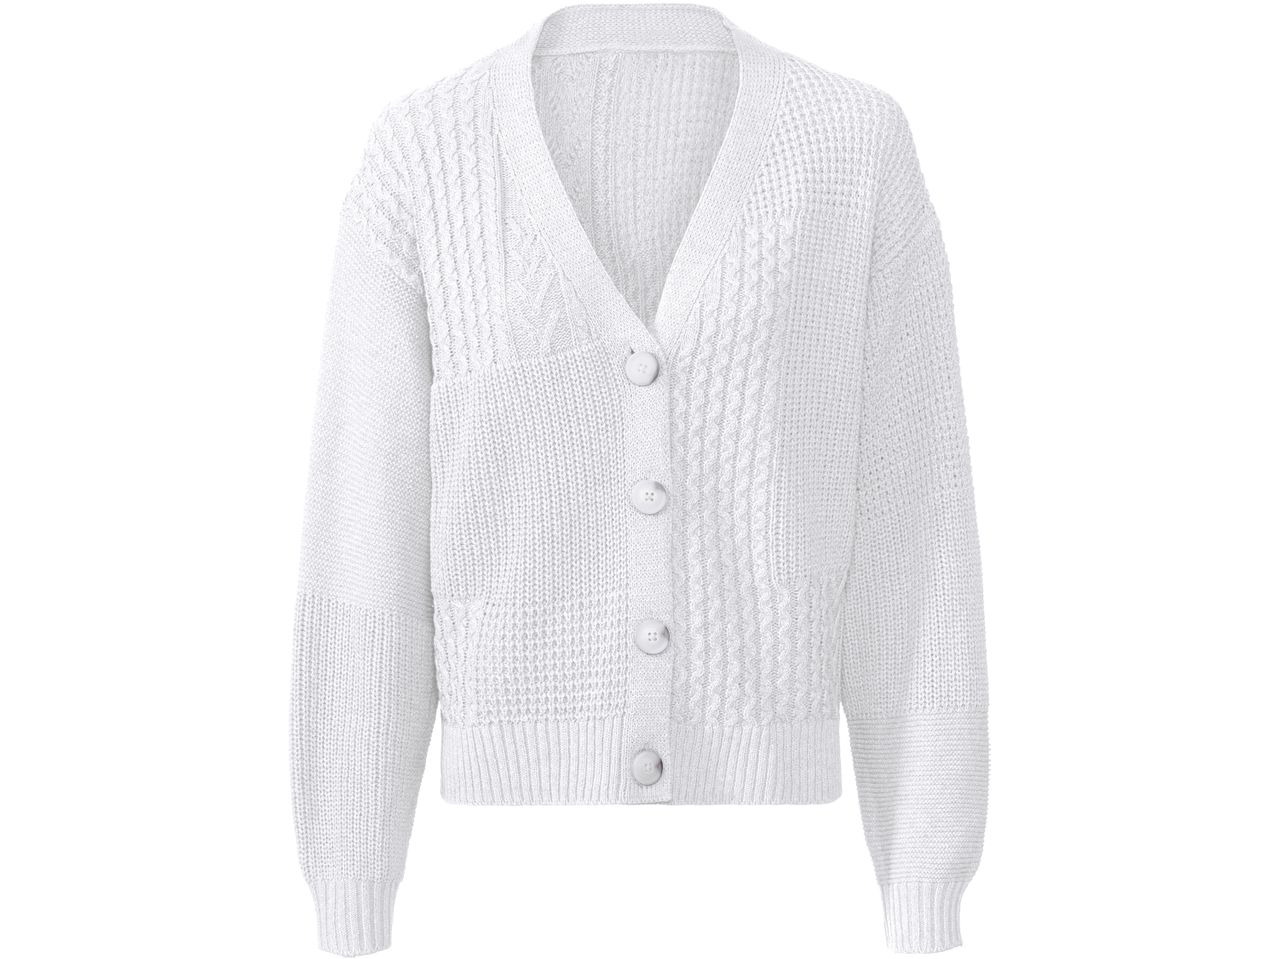 Go to full screen view: Ladies’ Chunky Knit Cardigan - Image 2